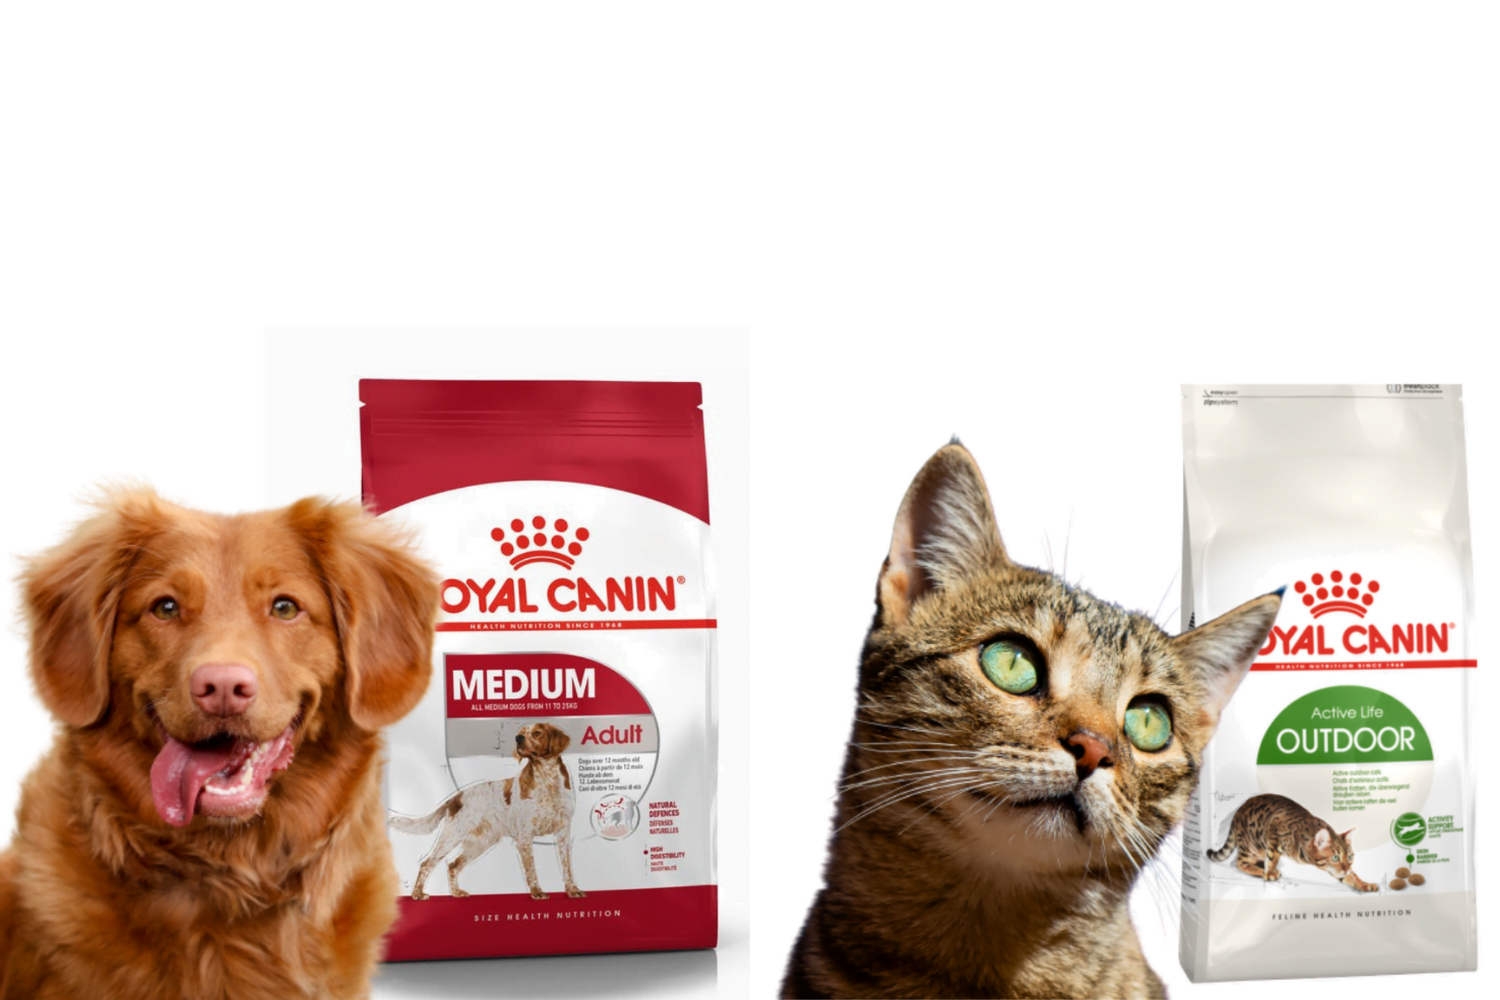 Combe Delacquis pension chiens chats alimentation chien royal canin lyon - Accueil